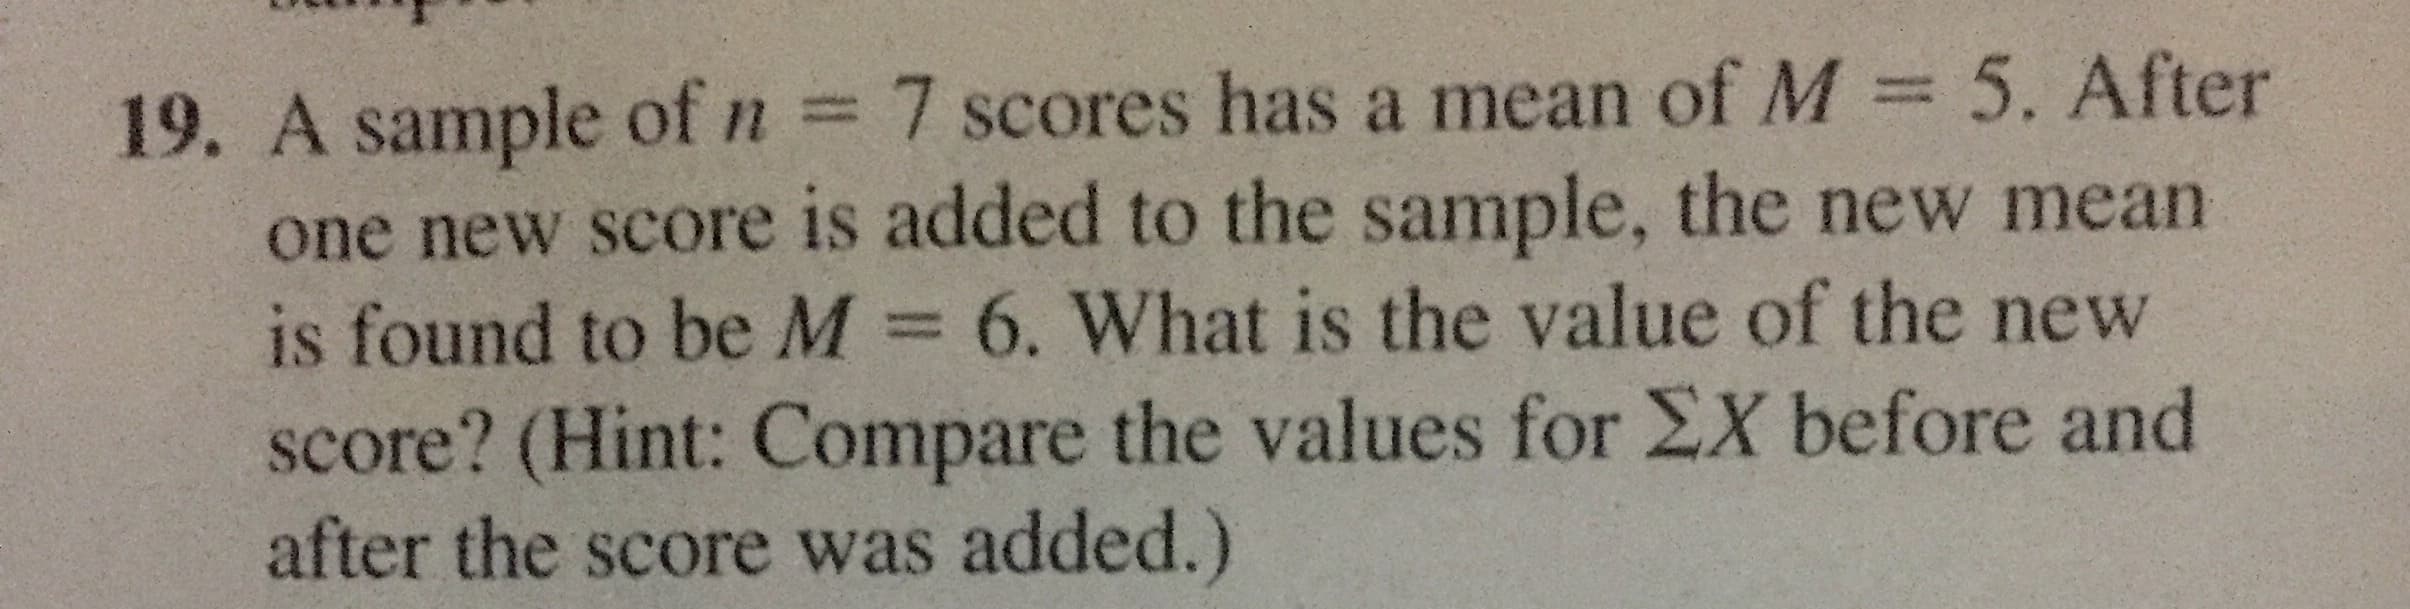 19. A sample of n = 7 scores has a mean of M = 5. After
one new score is added to the sample, the new mean
is found to be M 6. What is the value of the new
score? (Hint: Compare the values for EX before and
after the score was added.)
%3D
%3D
